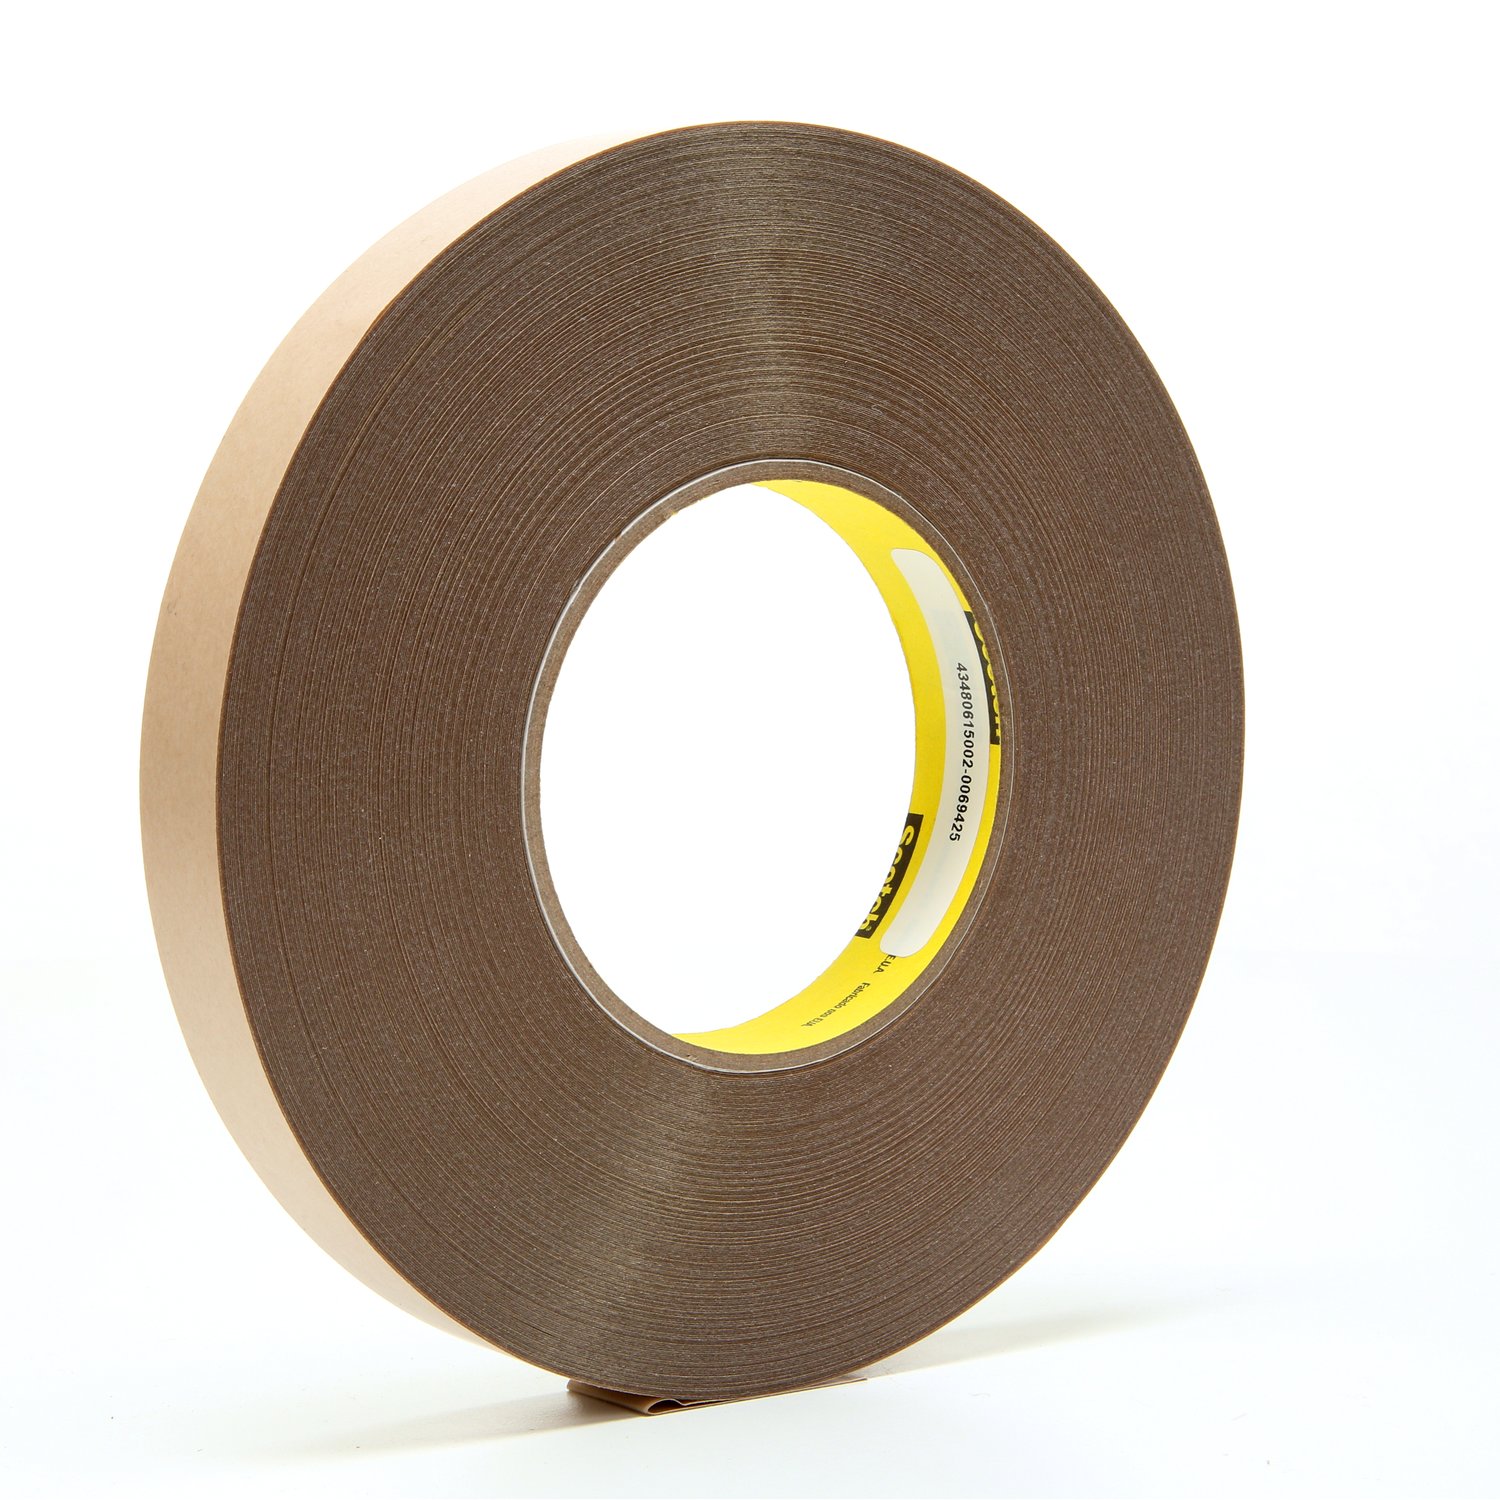 7000048528 - 3M Removable Repositionable Tape 9425, Clear, 3/4 in x 72 yd, 5.8 mil,
12 rolls per case